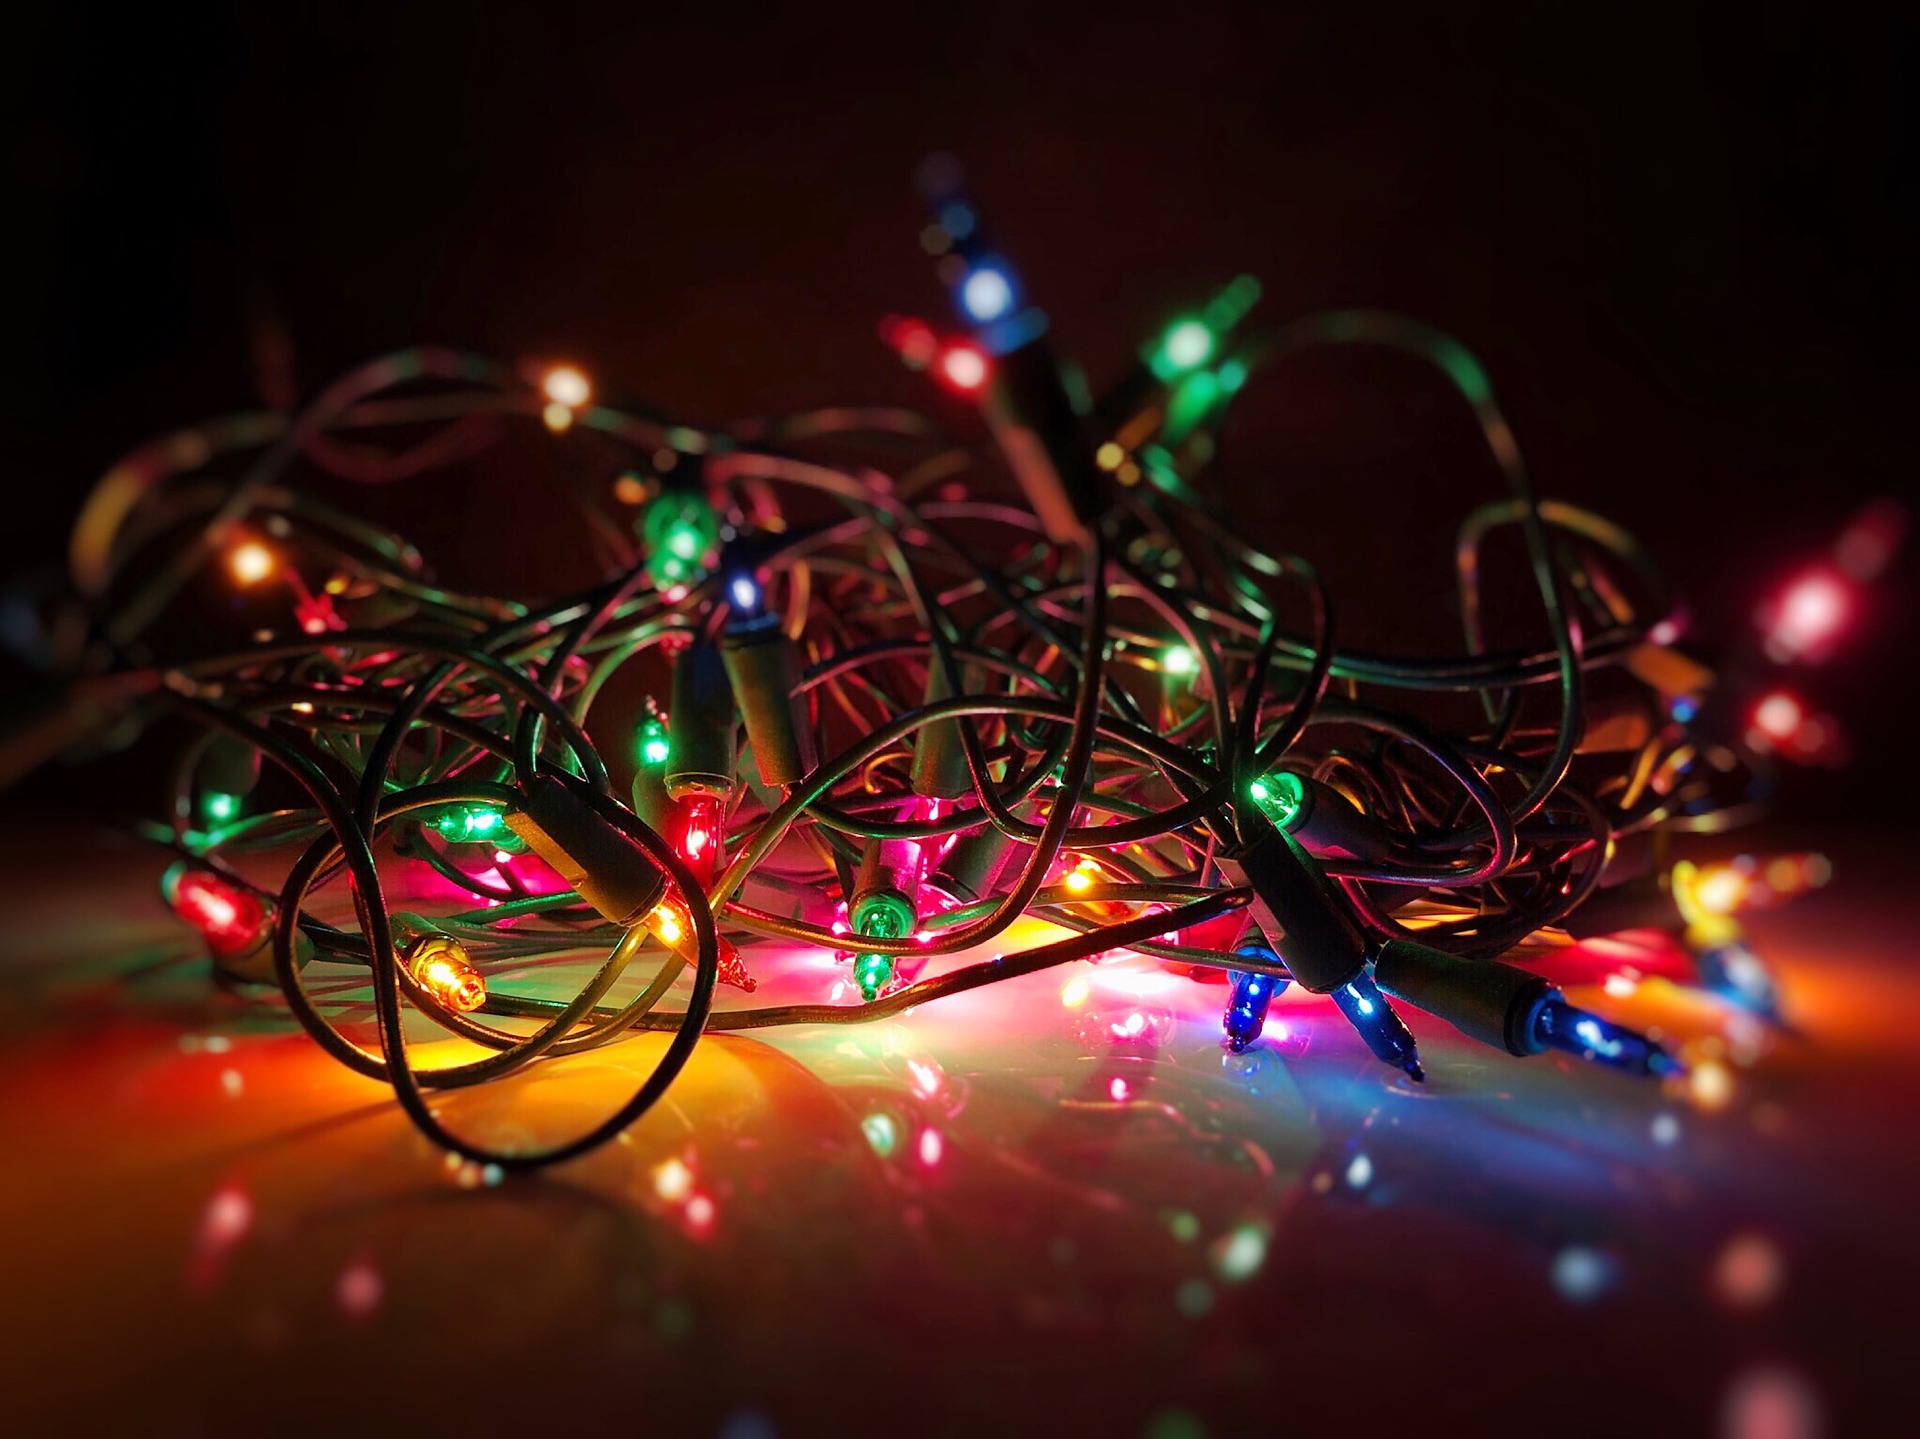 Low Tech Hacks to Detangle Holiday Lights's featured image